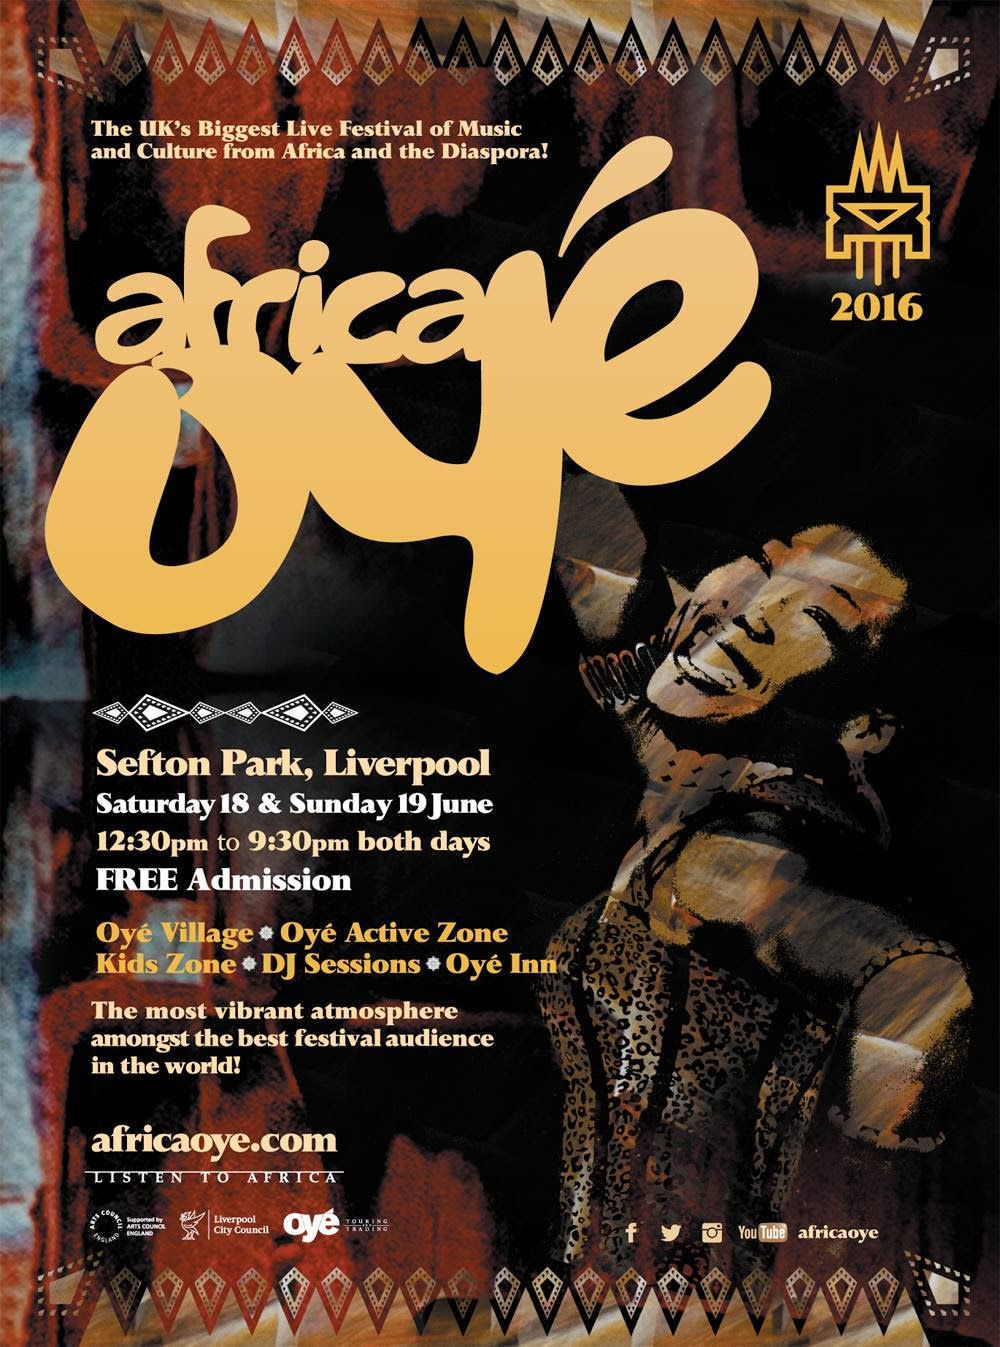 Africa Oye Reveals First Acts For 2016 Festival In Sefton Park